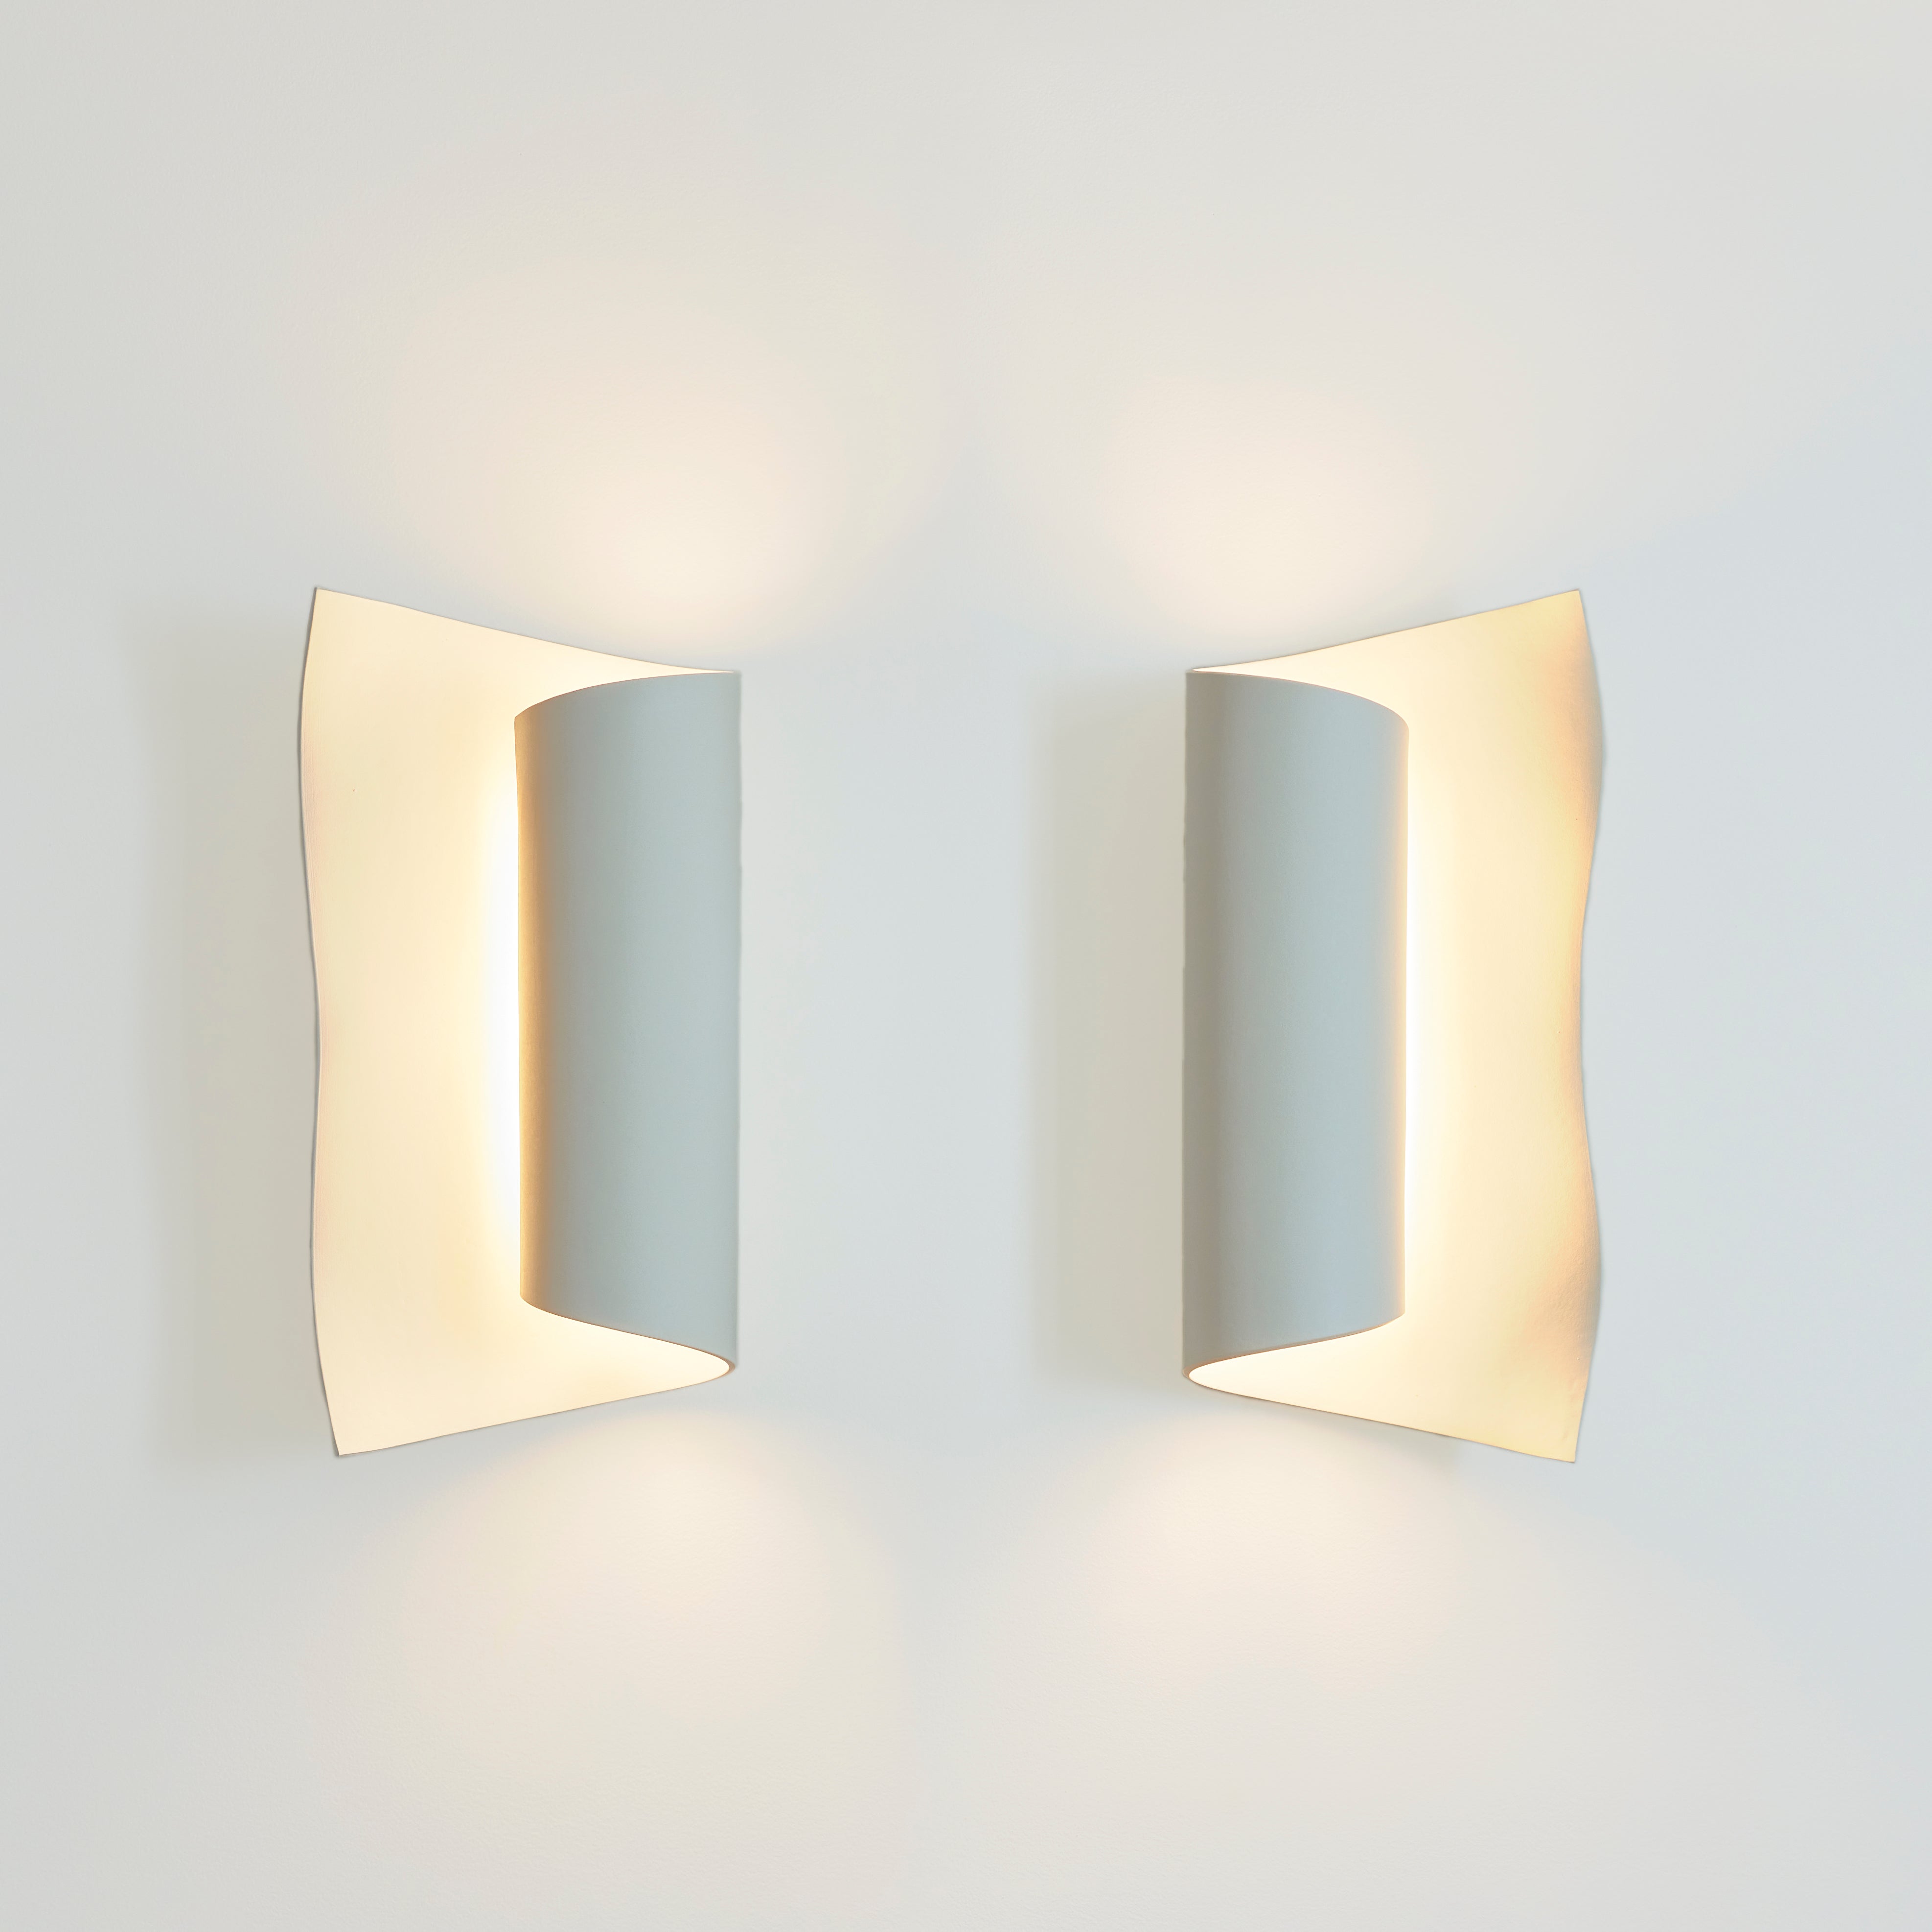 Scroll Glazed Ceramic Wall Sconce Luminaire Pair For Sale